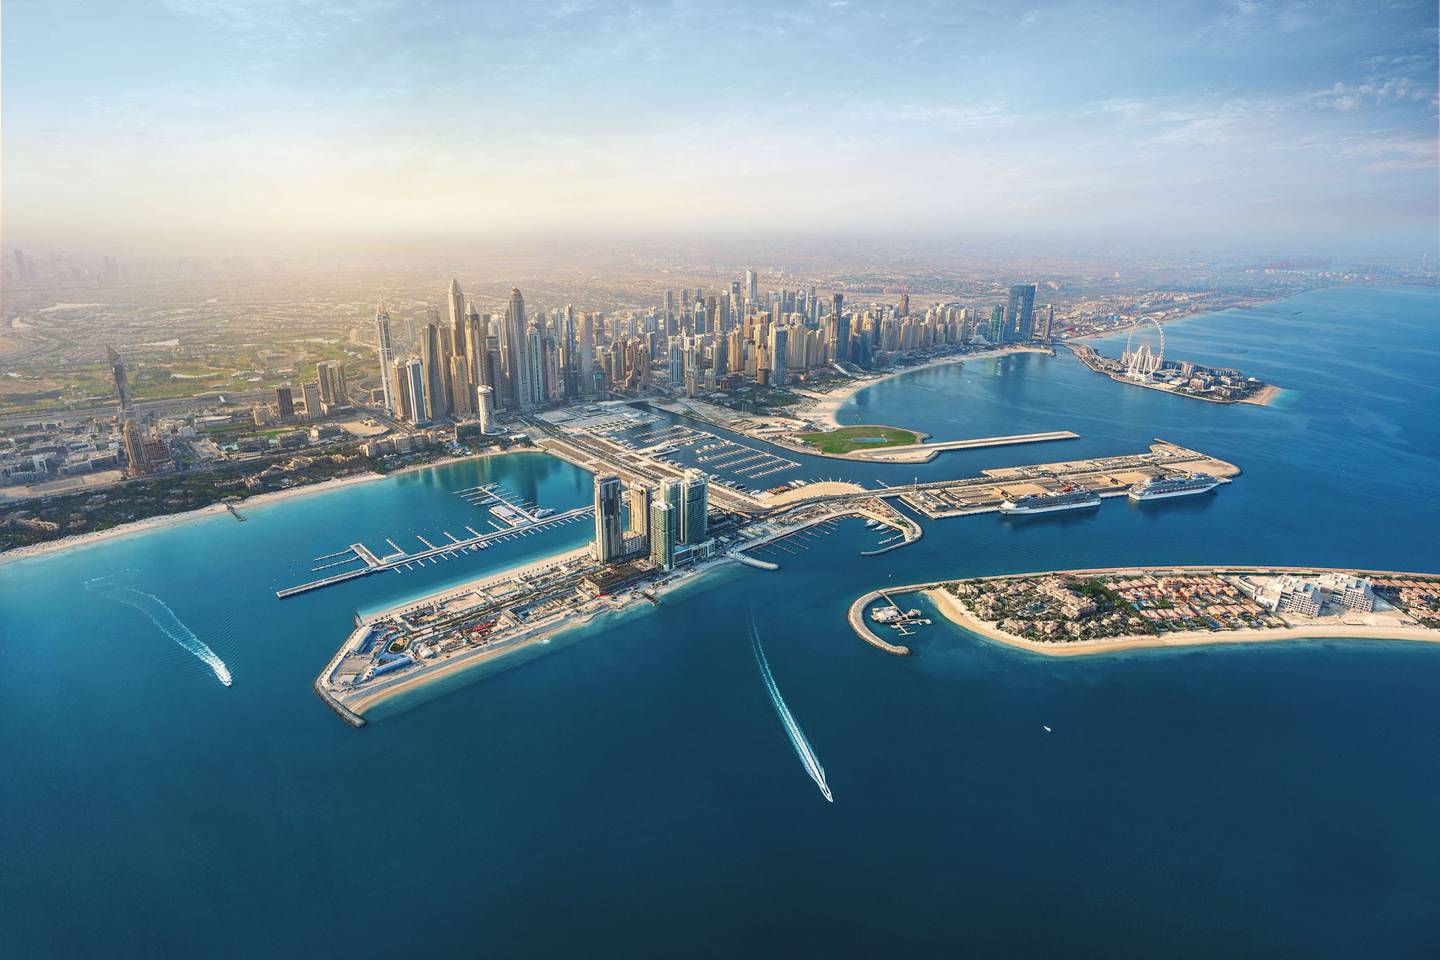 Dubai Harbour will be the first cruise facility in the region to be the homeport for two LNG-powered ships. Photo: WAM